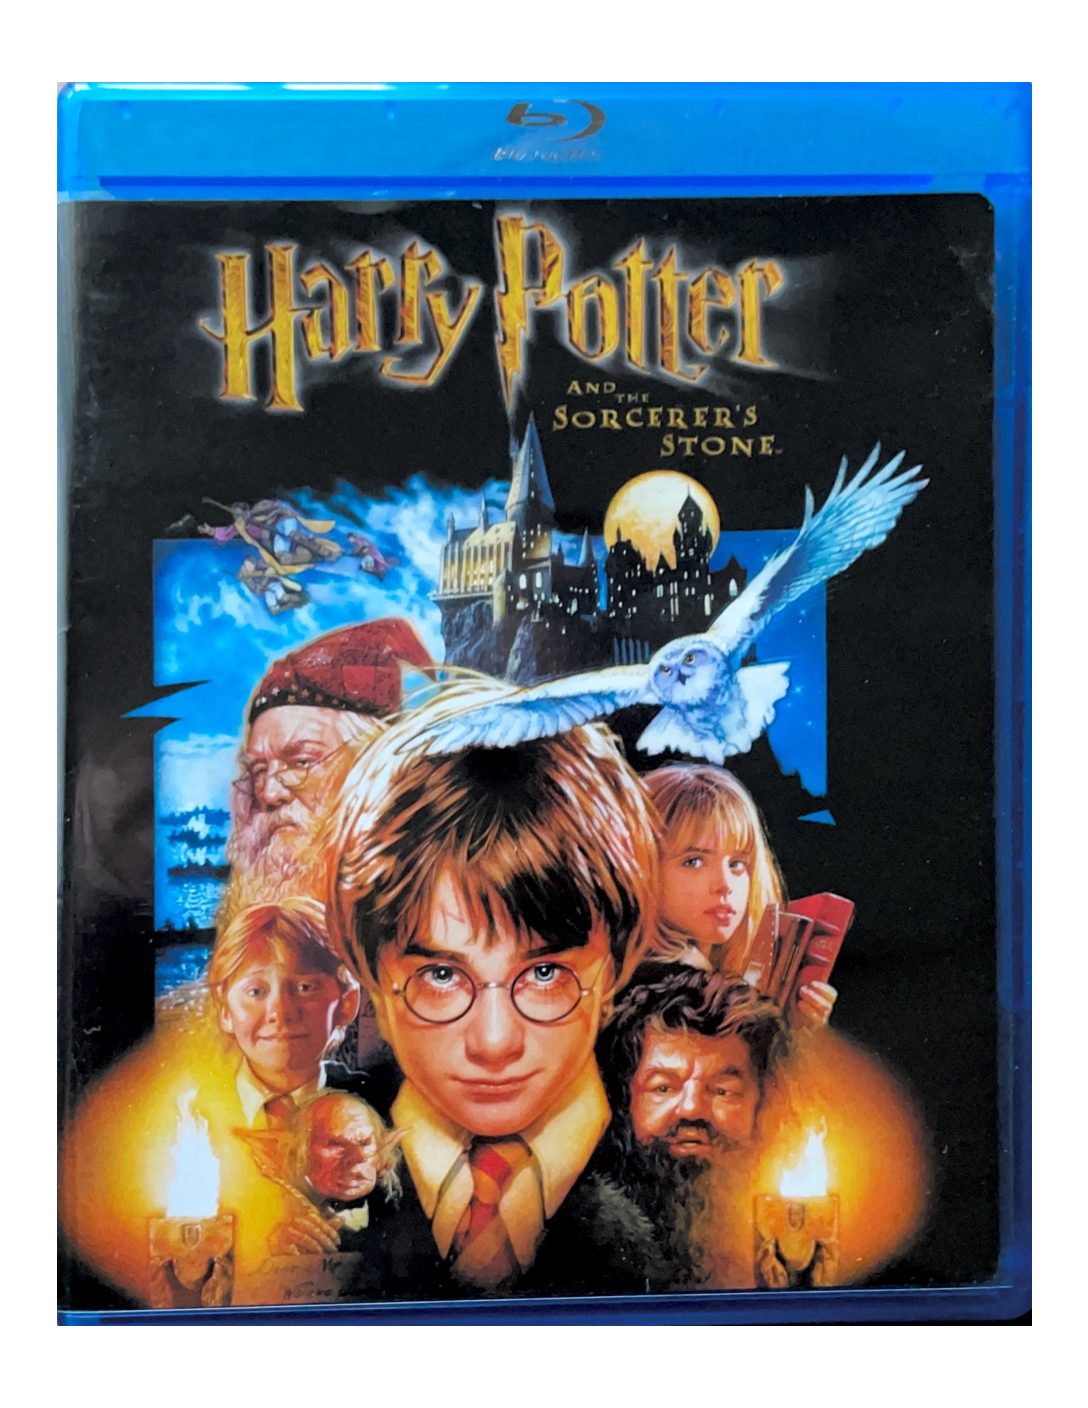 MOVIE REVIEW: Harry Potter and the Sorcerer’s Stone